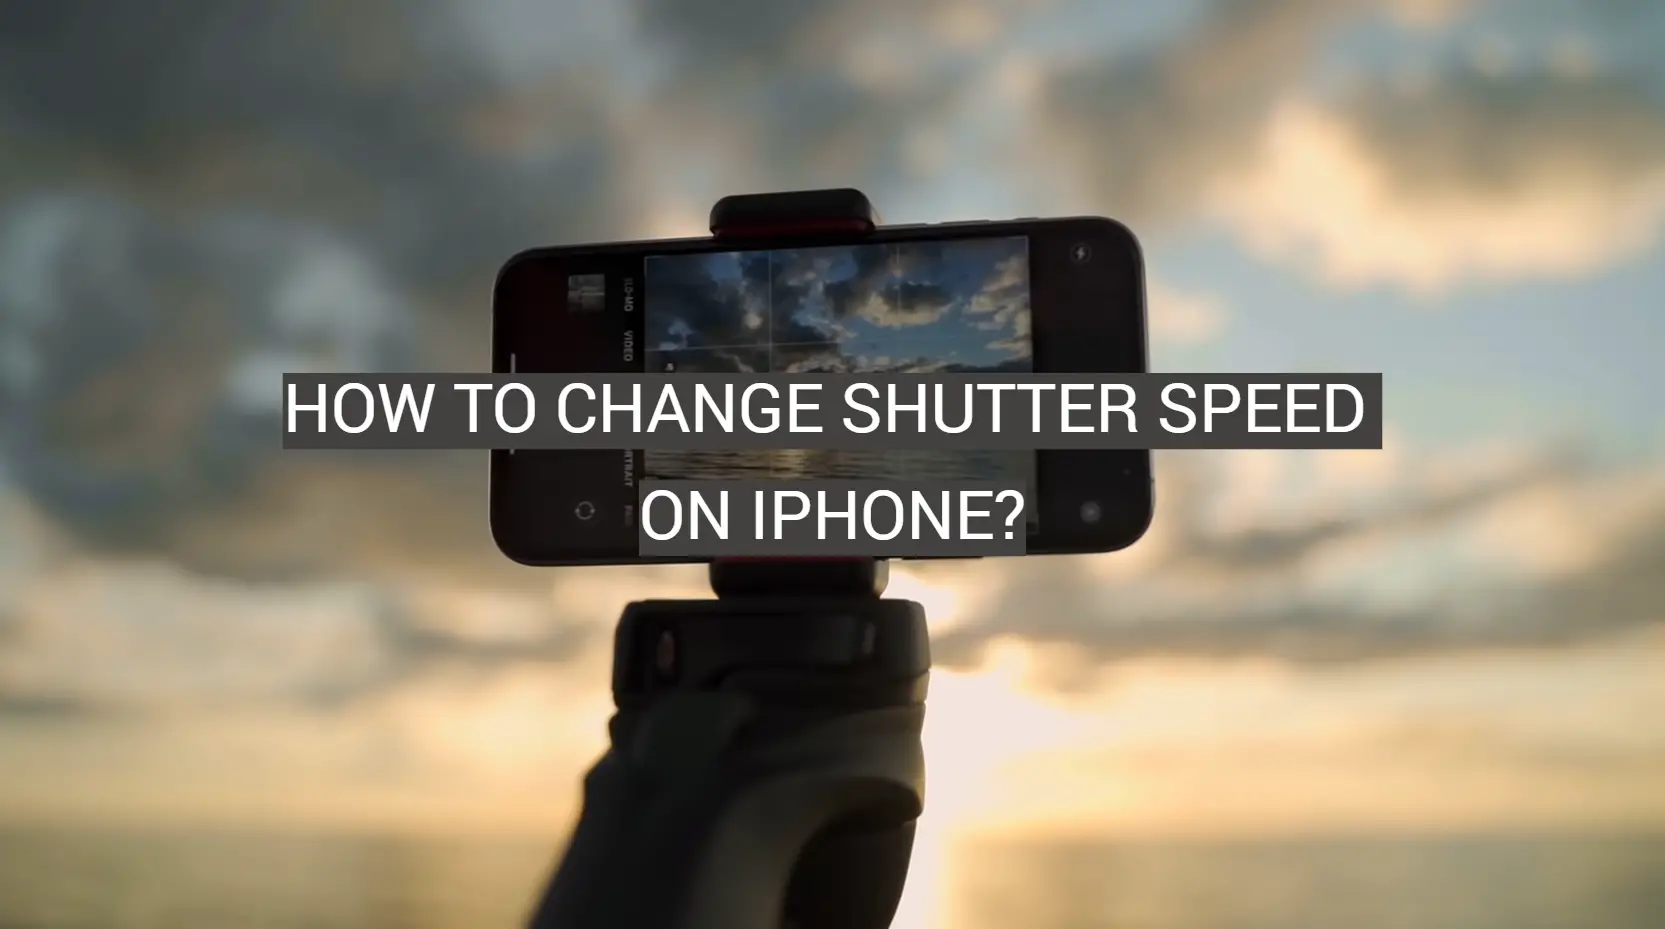 How to Change Shutter Speed on iPhone?